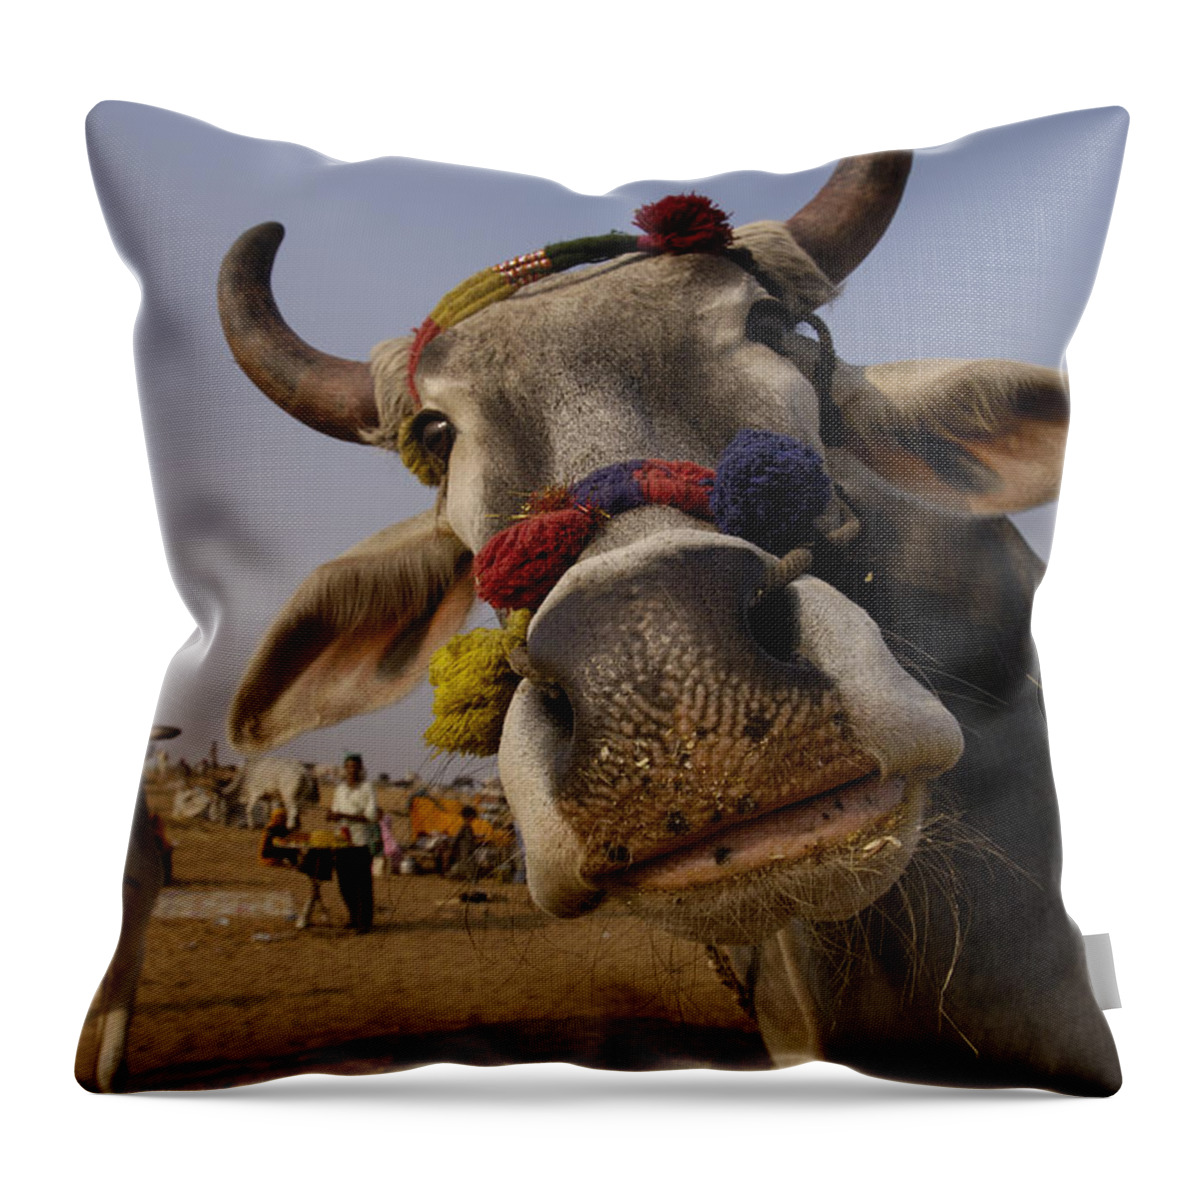 00210290 Throw Pillow featuring the photograph Domestic Cattle India by Pete Oxford